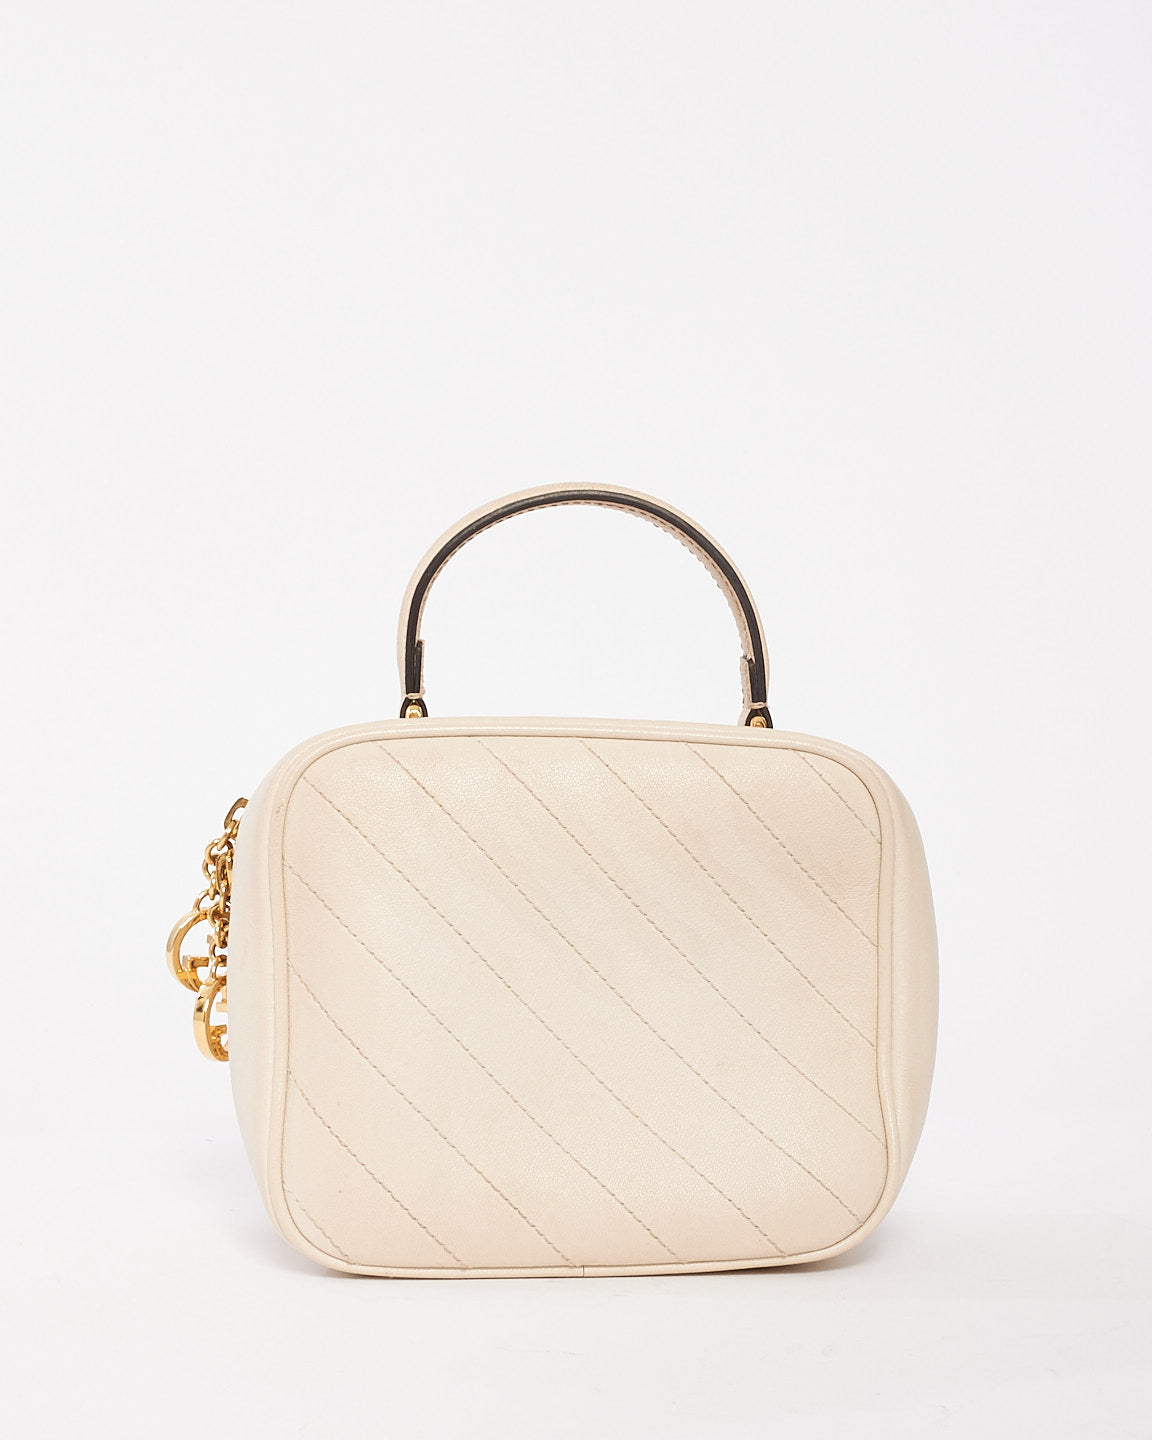 Gucci Off White Leather Blondie Top Handle Bag